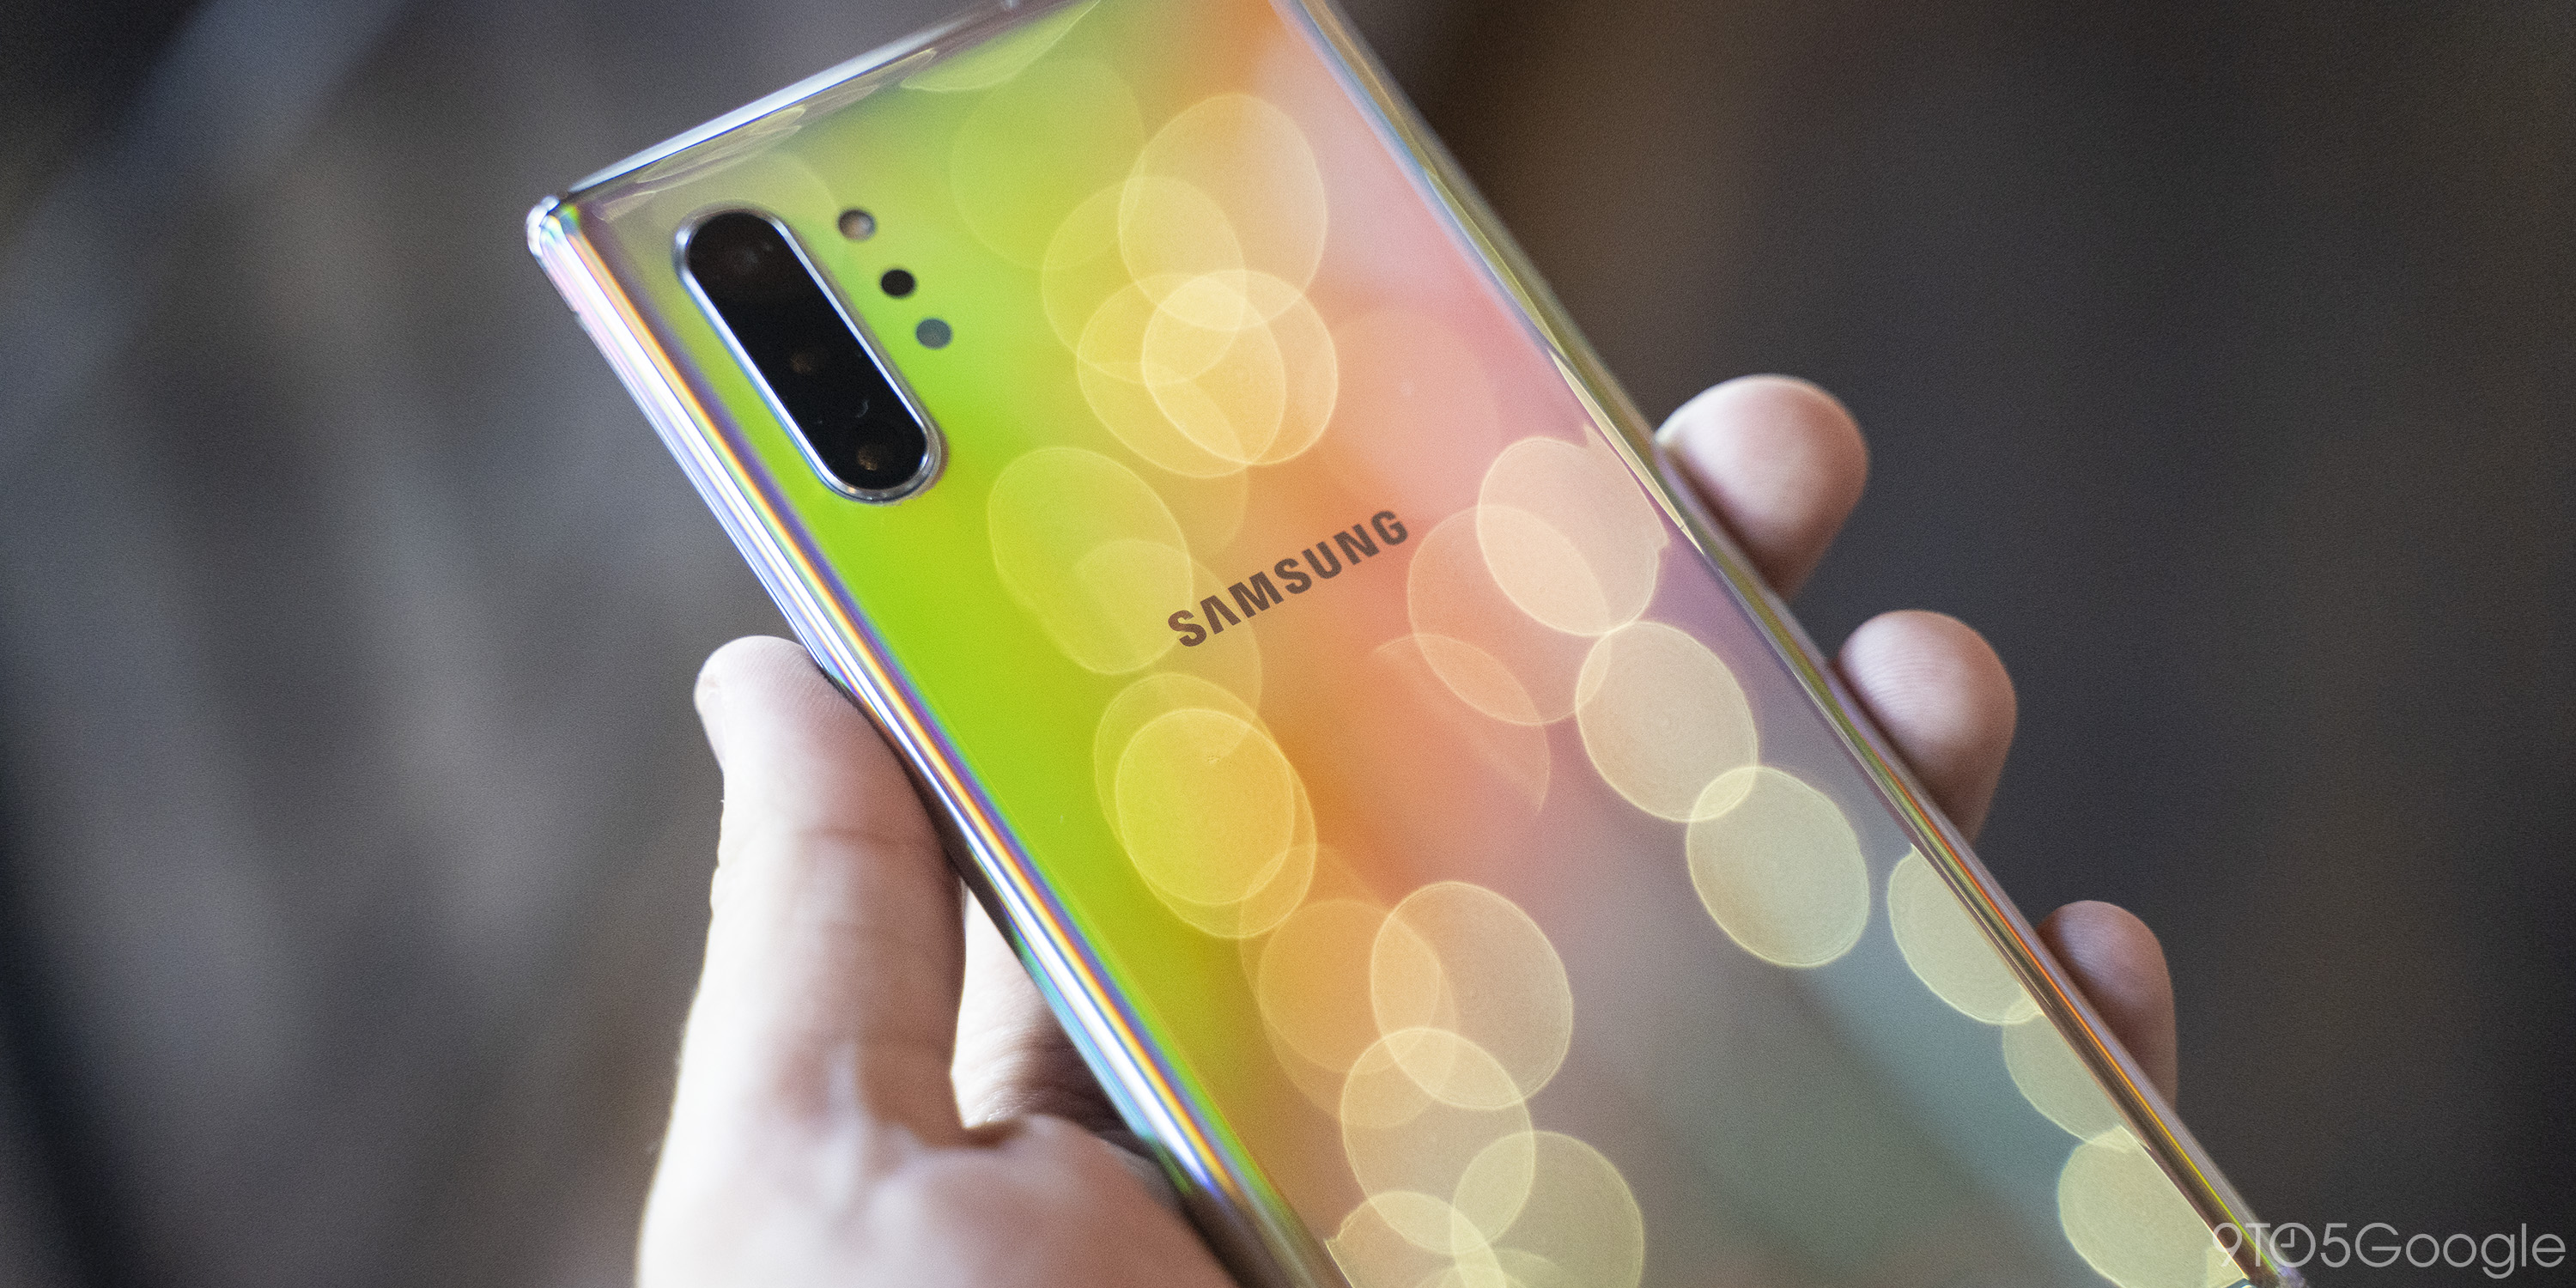 Galaxy Note 10's display, battery capacity, and S Pen improvements